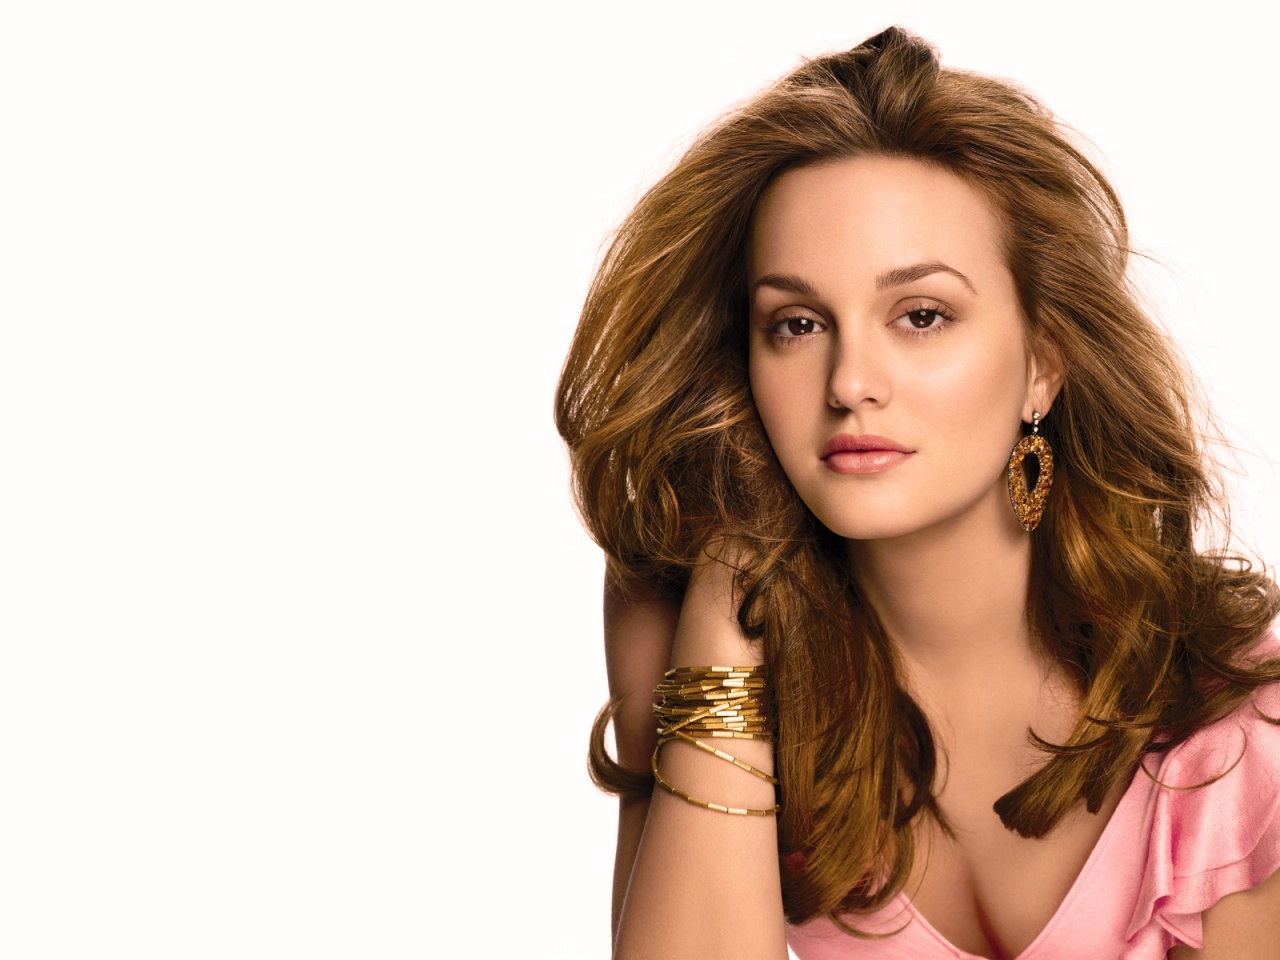 Leighton Meester American Actress Wallpapers in jpg format for free